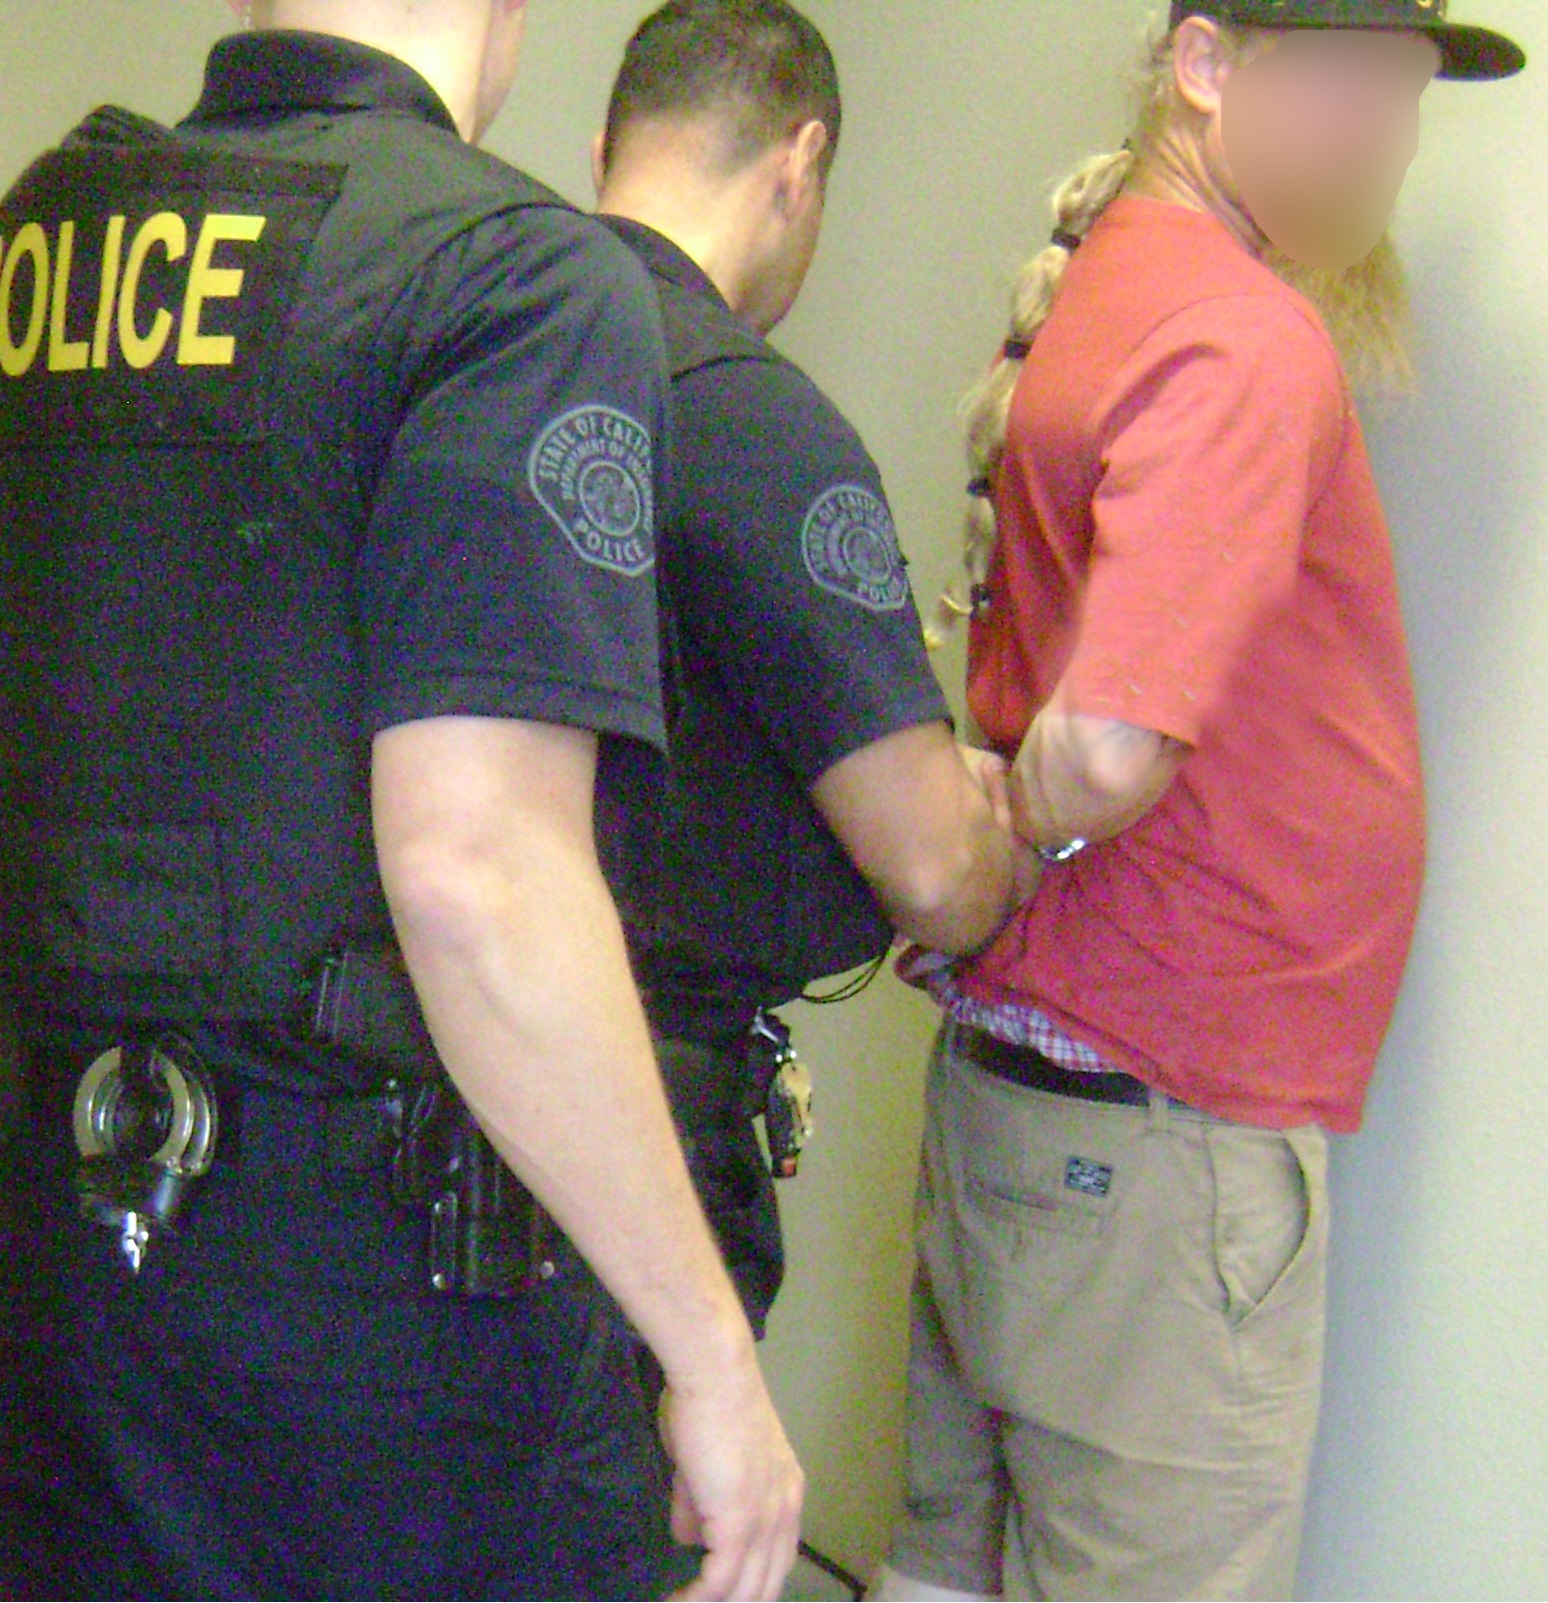 Local law enforcement detaining a suspect to protect SWIFT investigators during the citation process